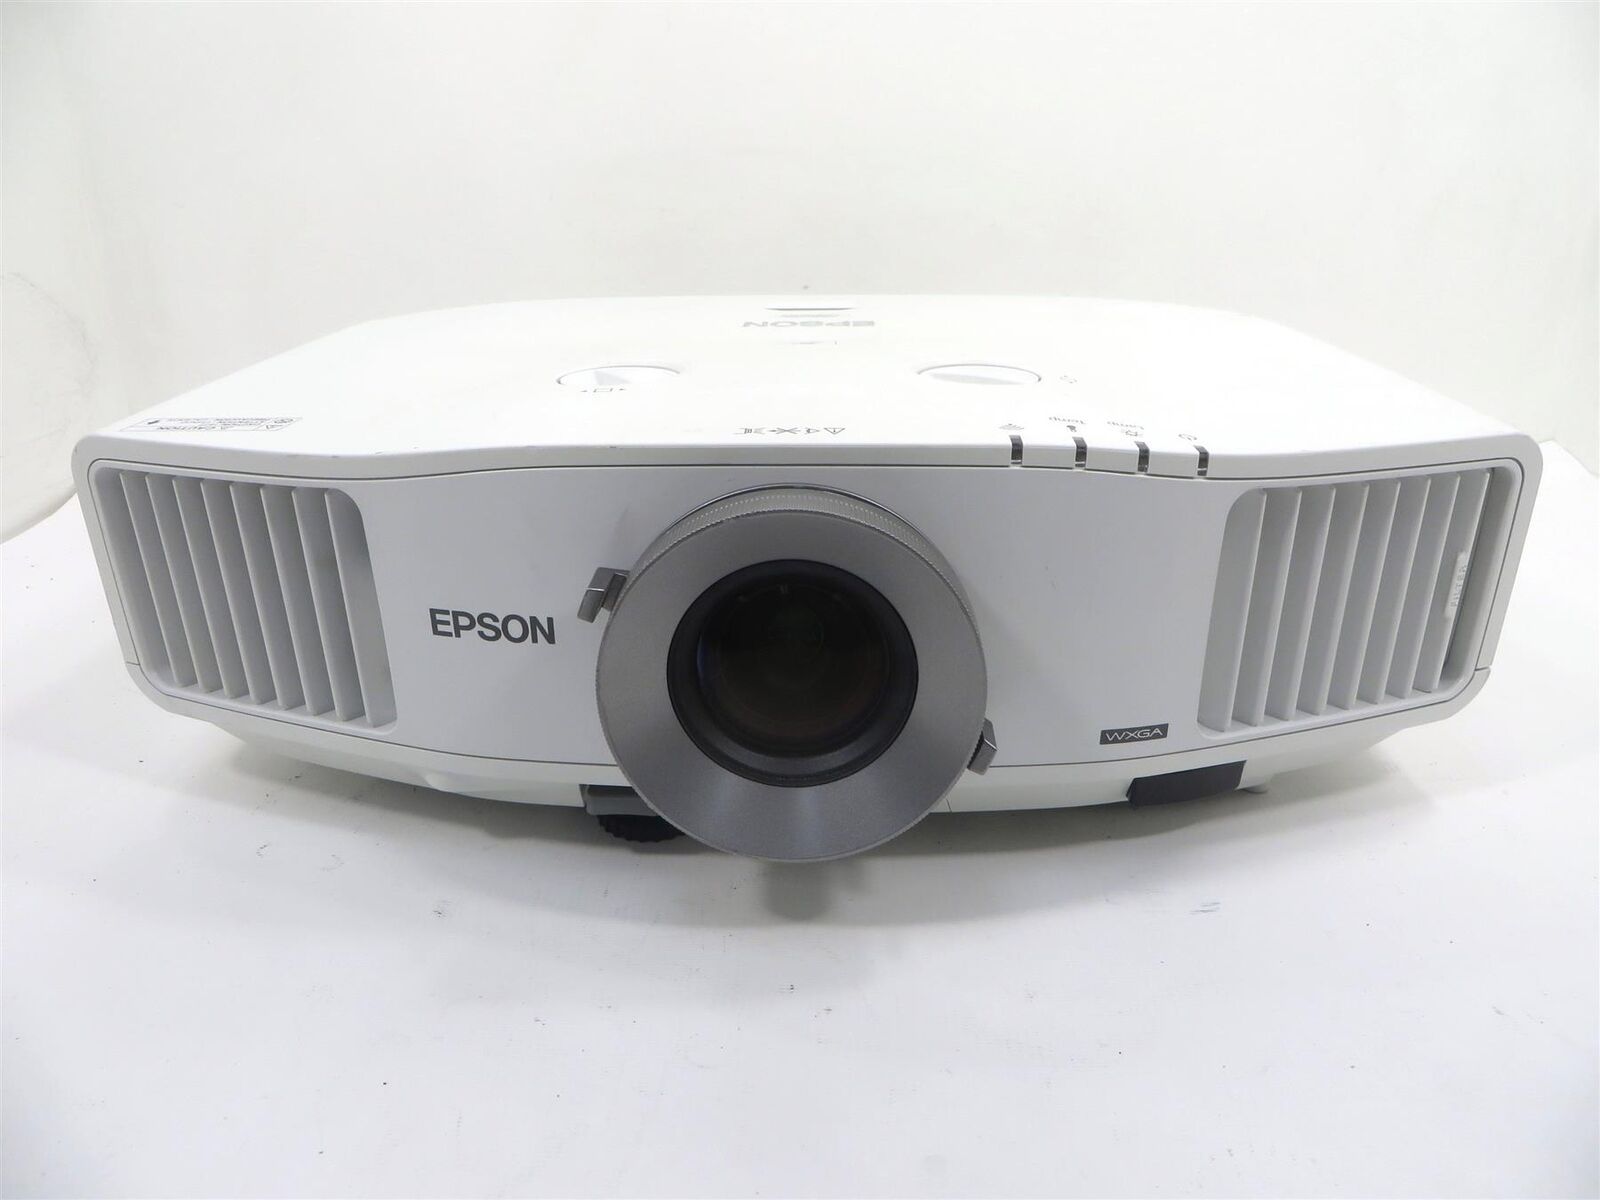 Epson PowerLite Pro G5650W 3LCD WXGA Projector - Lamp Runtime: 1760 Hrs